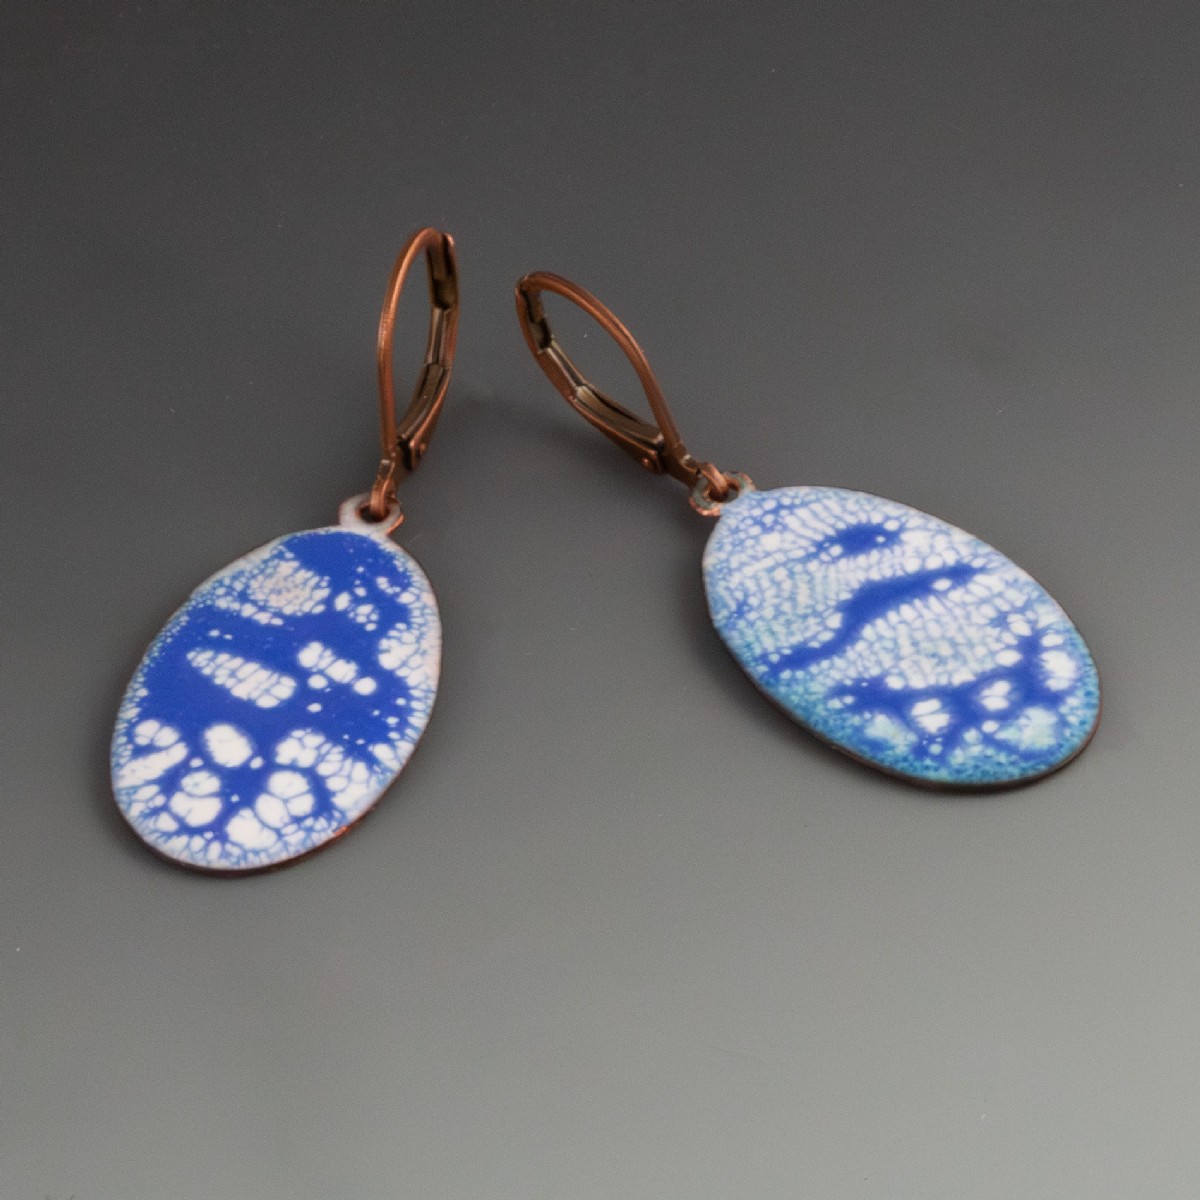 Dishfunctional Designs: How To Get Started Making Torch Fired Enamel Jewelry